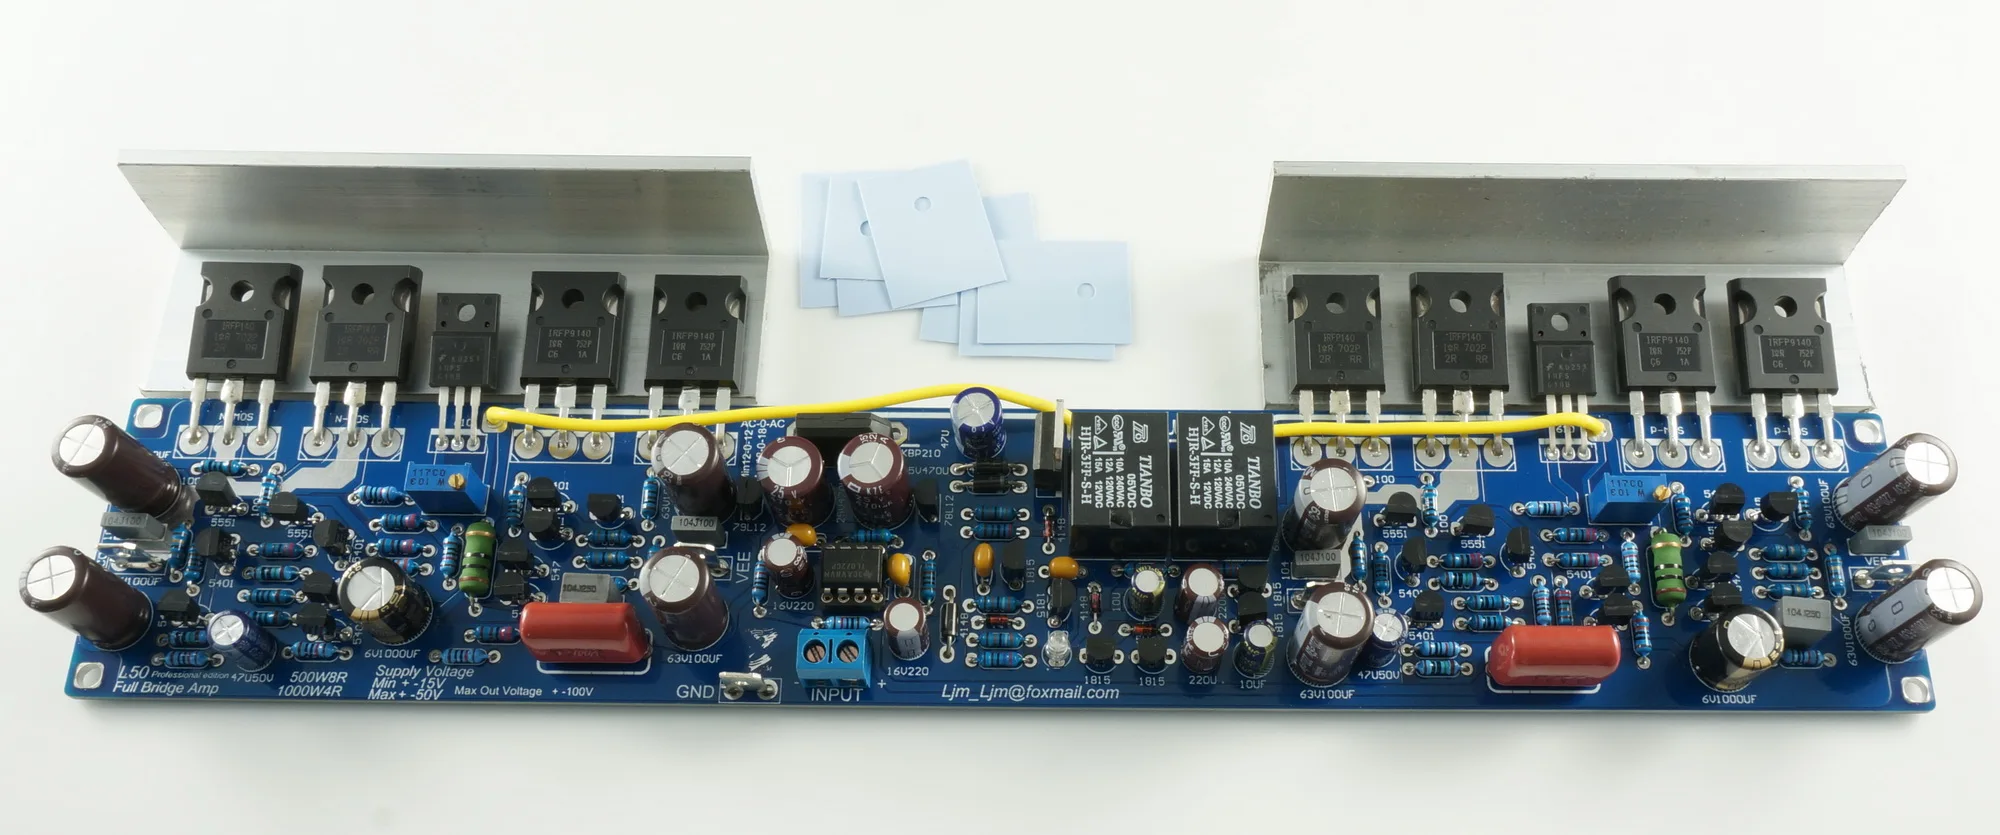 

LJM L50 500W 8hms Full Bridge Mono Front and Rear Stage Combined Power Amplifier AMP Board Professional edition